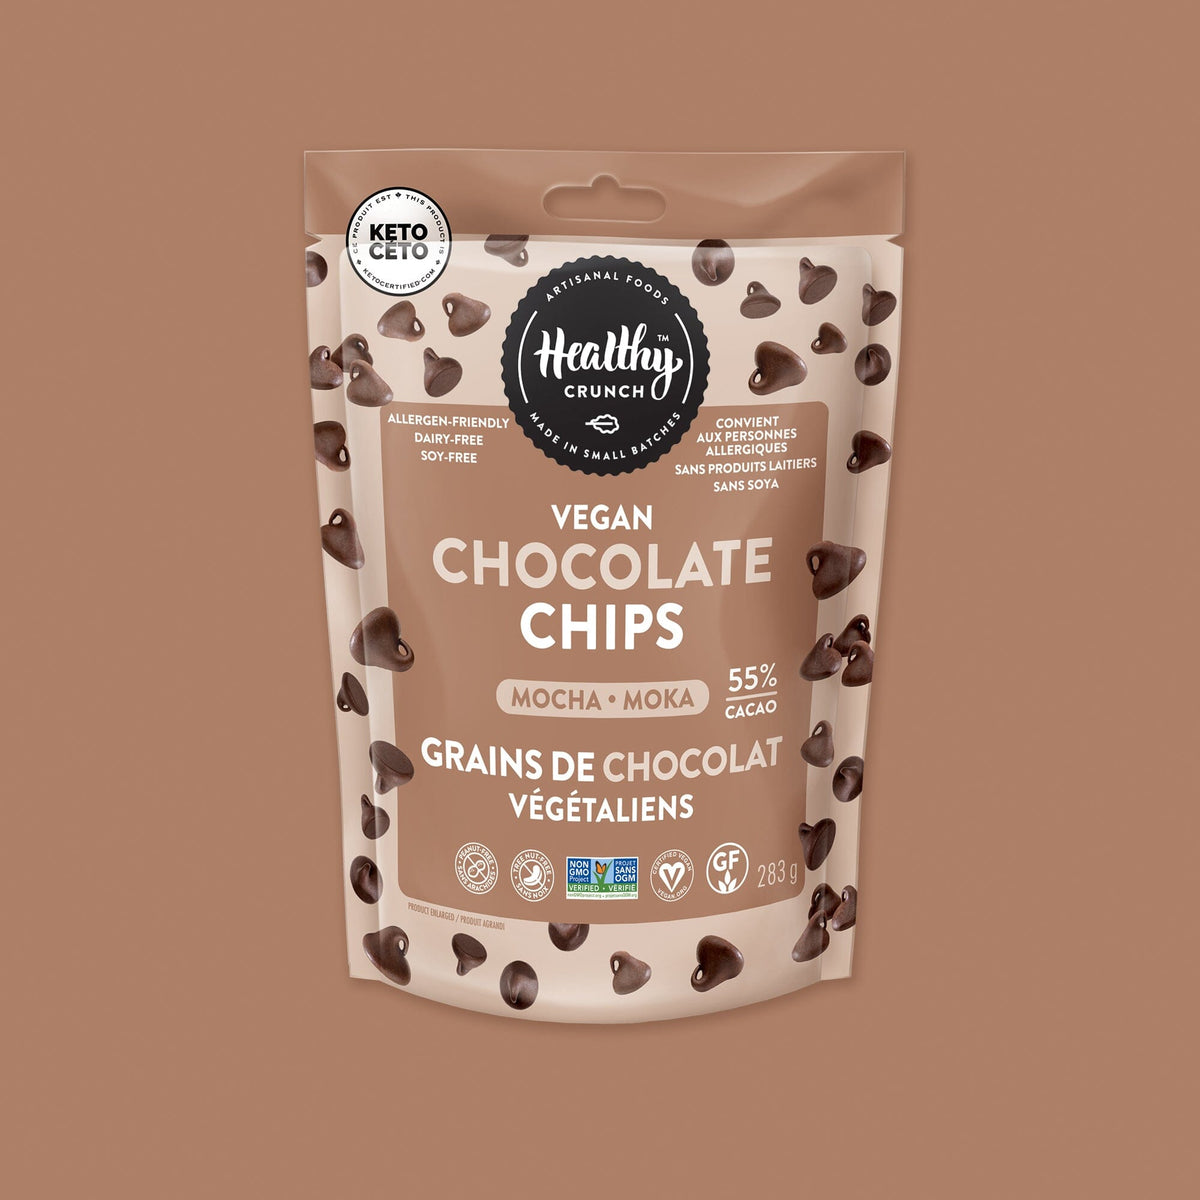 NEW Chocolate Chips Bundle Pack